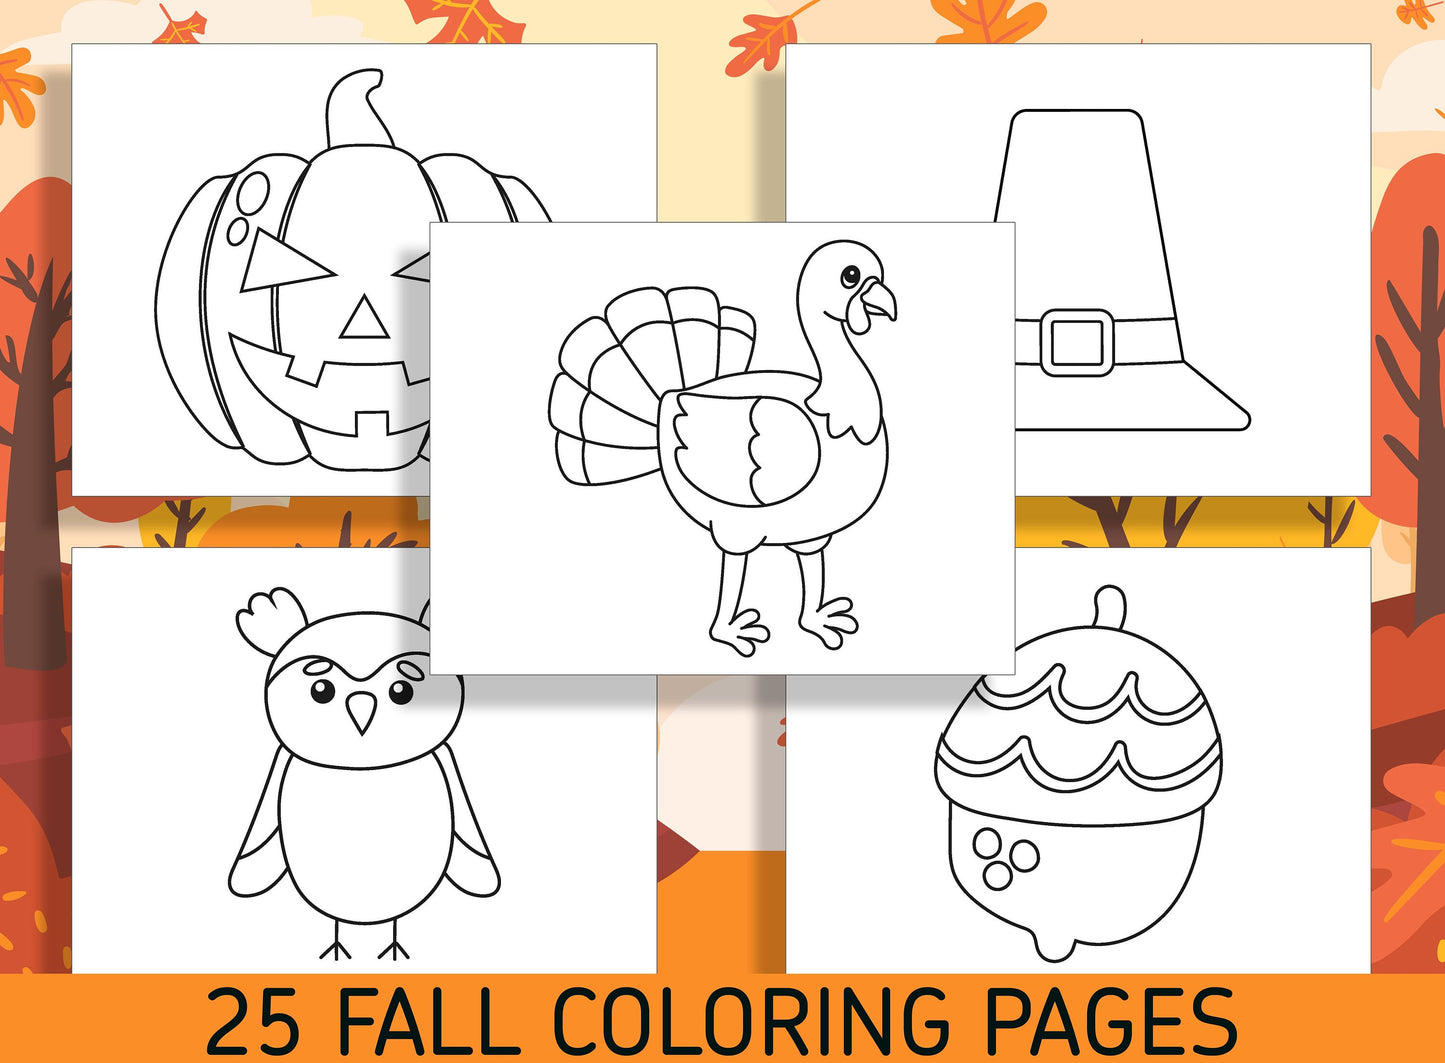 Fall Fun for Little Ones: 25 Easy Coloring Pages for Kindergarten and Preschool - PDF File - Instant Download